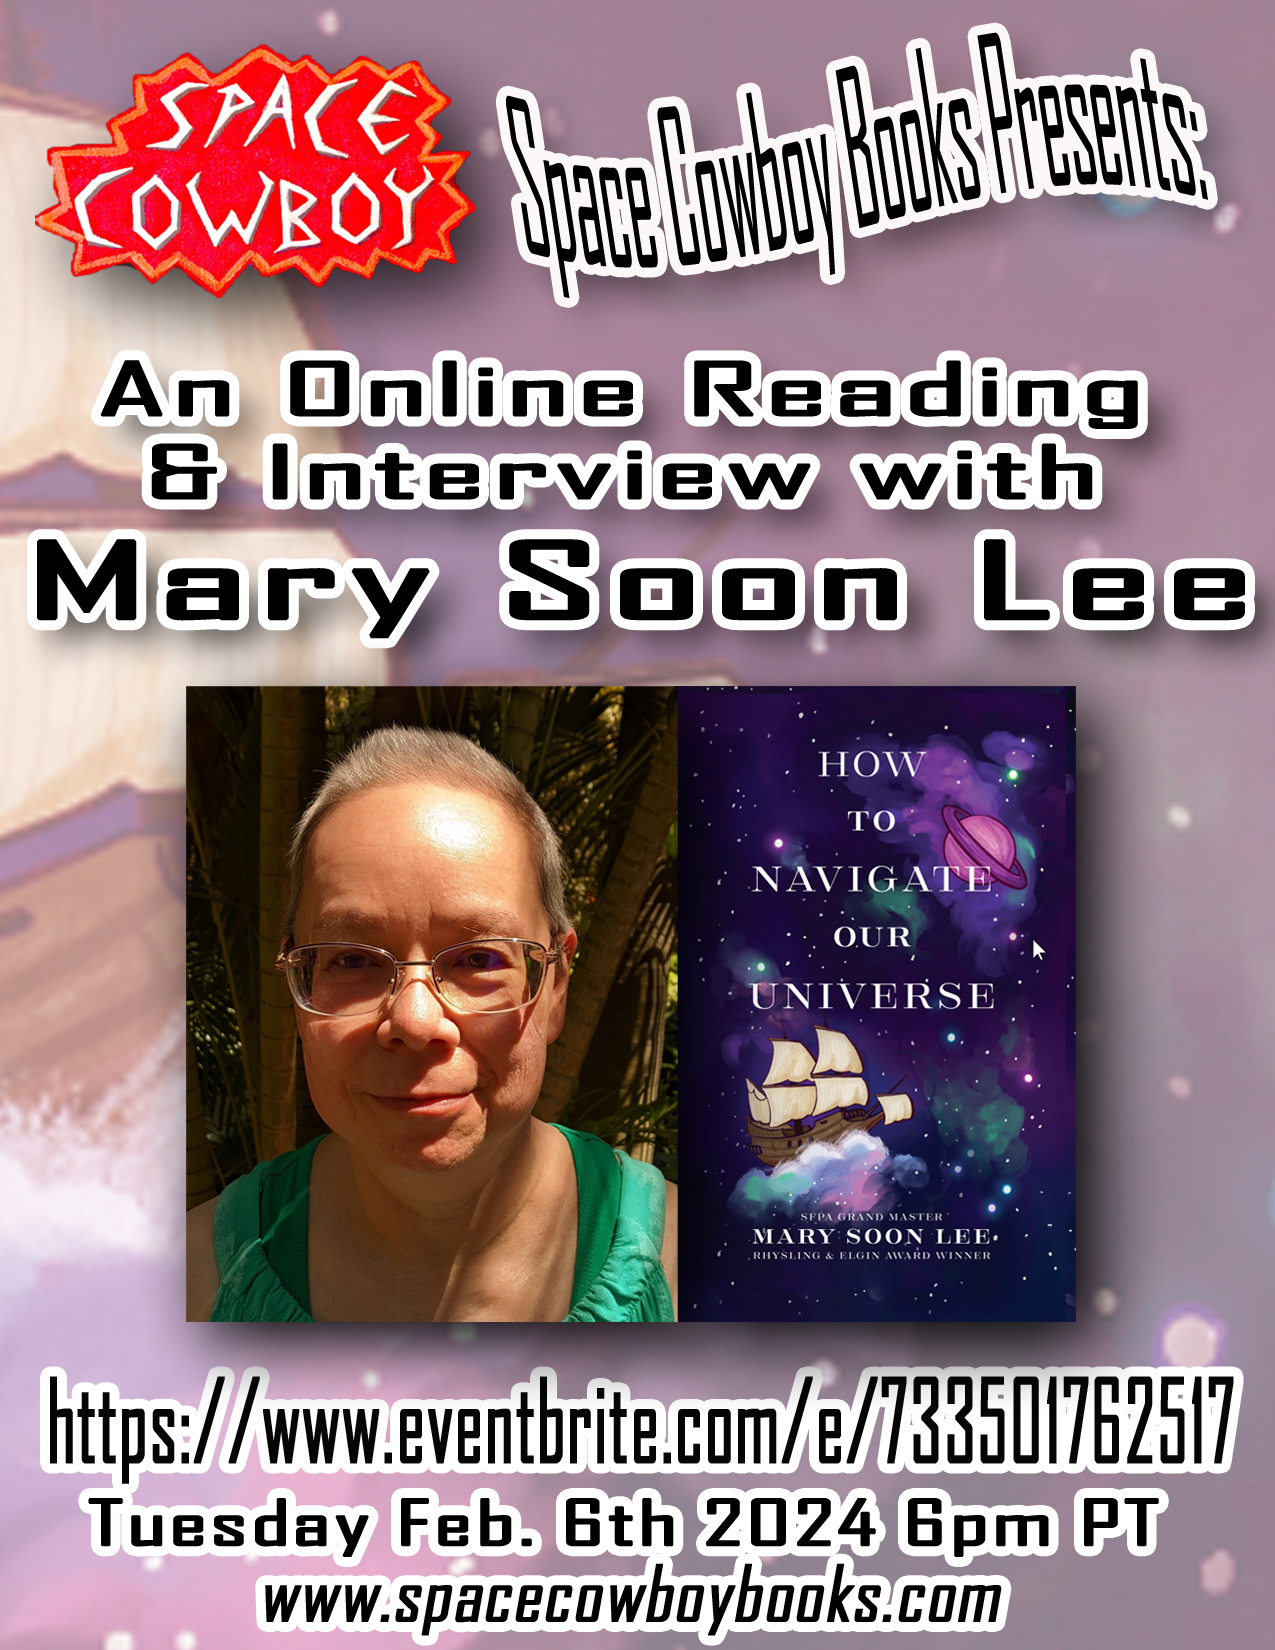 Flyer for an event. The top text reads: Space Cowboy Books Presents: An Online Reading & Interview with Mary Soon Lee. In the middle of the flyer is a photo of Mary (very short graying hair and glasses) alongside an image of the front cover of her book 